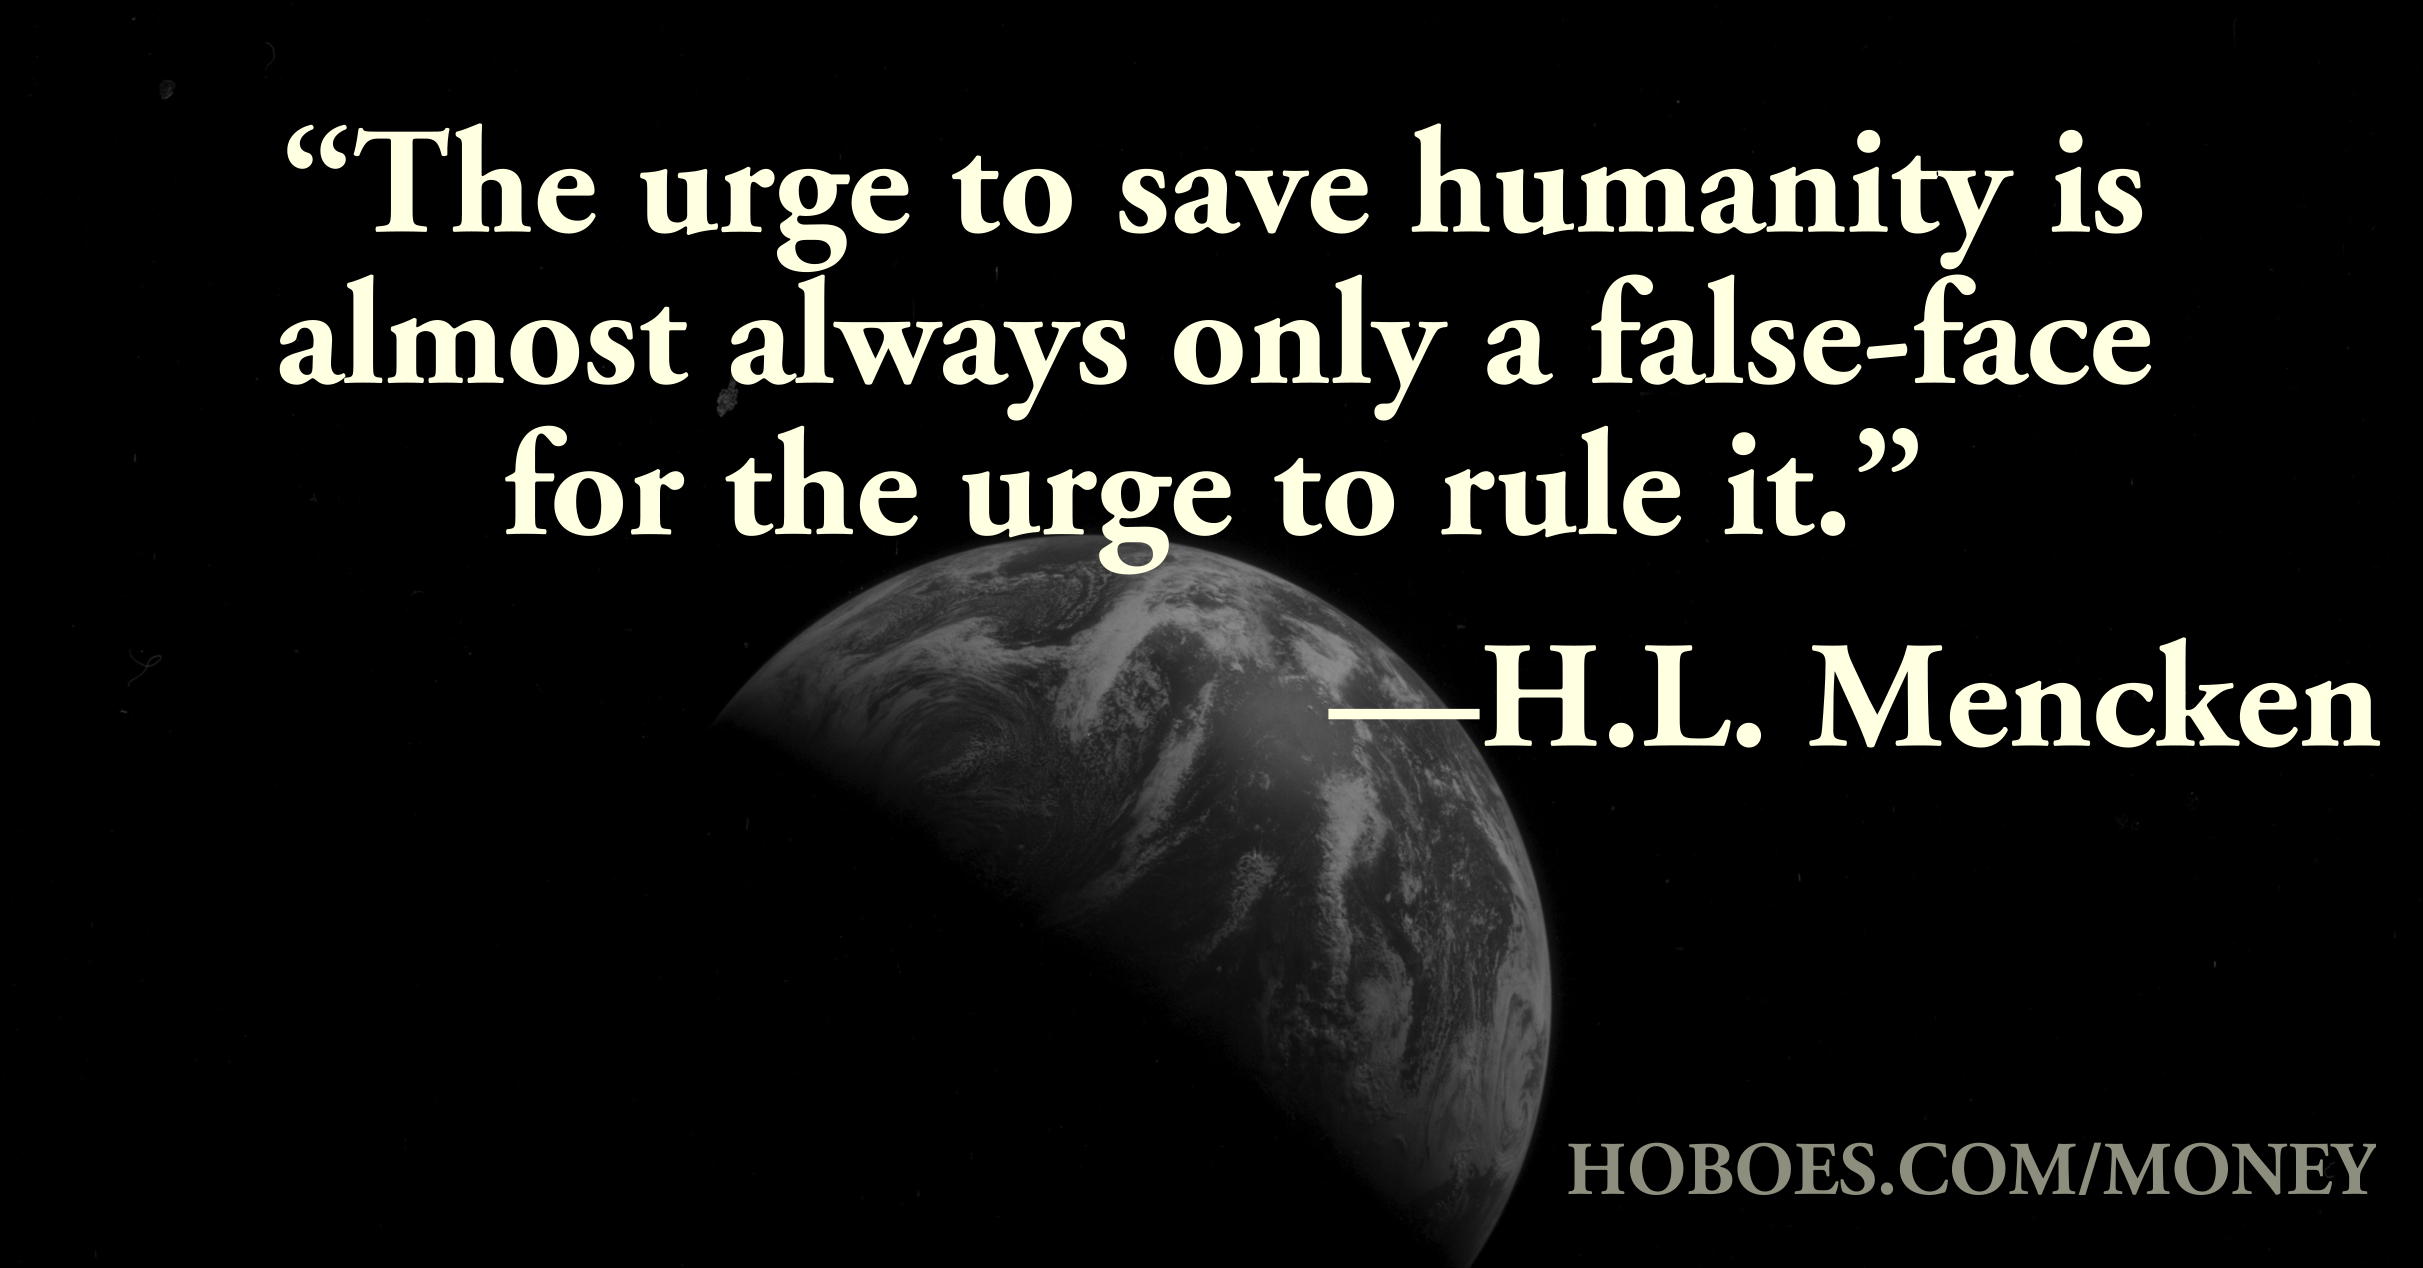 The urge to rule: “The urge to save humanity is almost always only a false-face for the urge to rule it.”—H. L. Mencken; Eloi class; anointed, political elite; H. L. Mencken